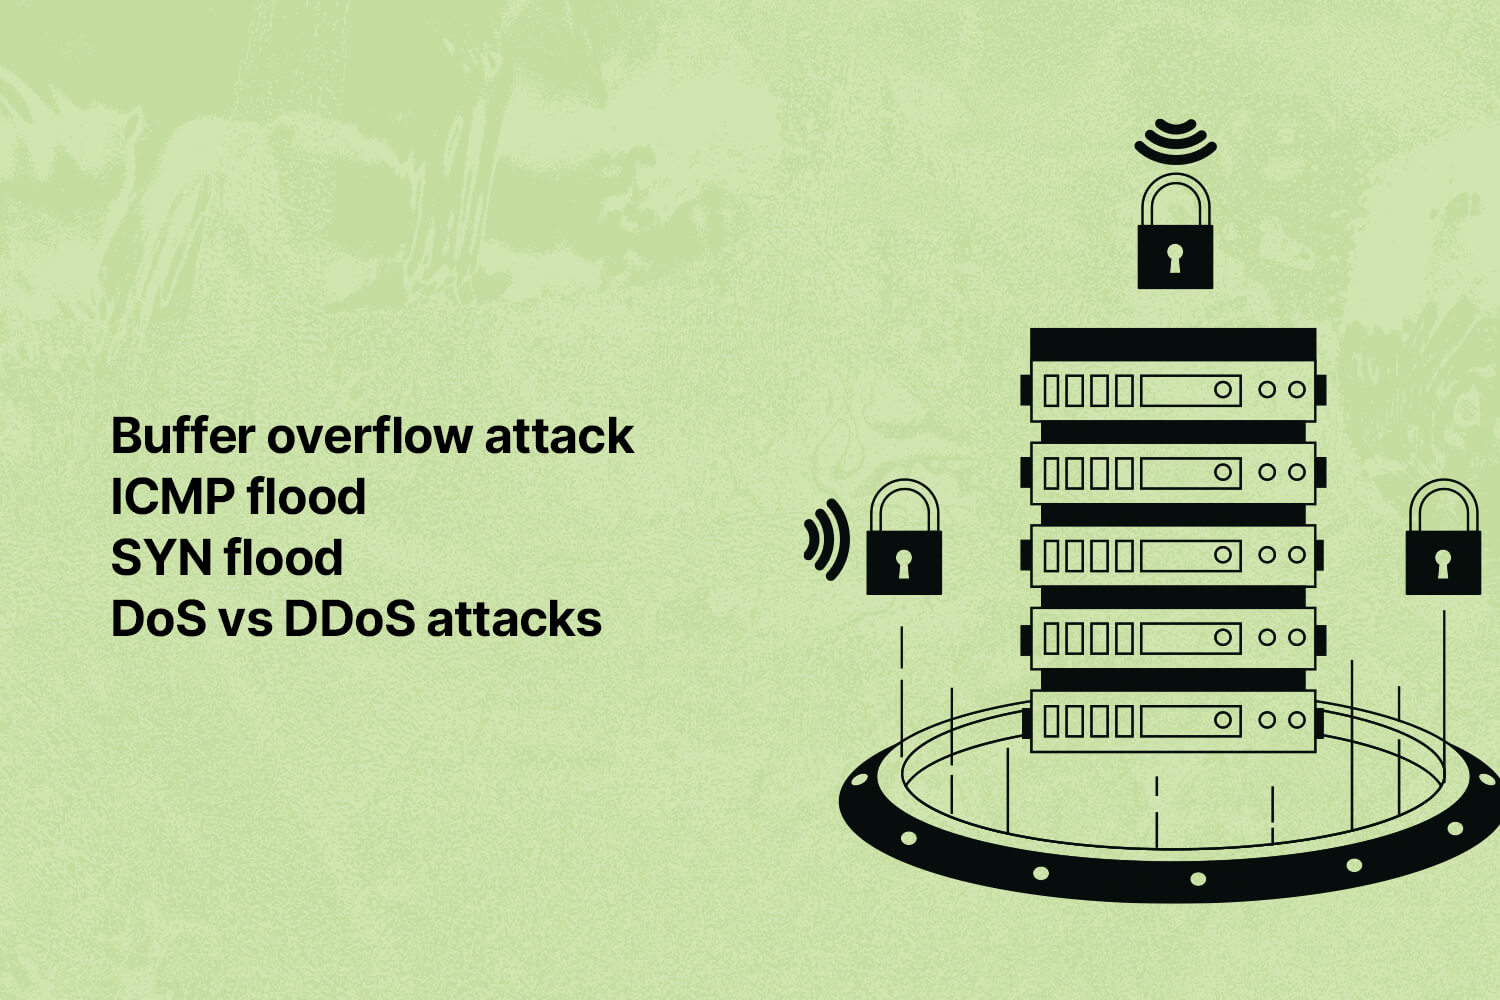 What Is A Dos Attack?